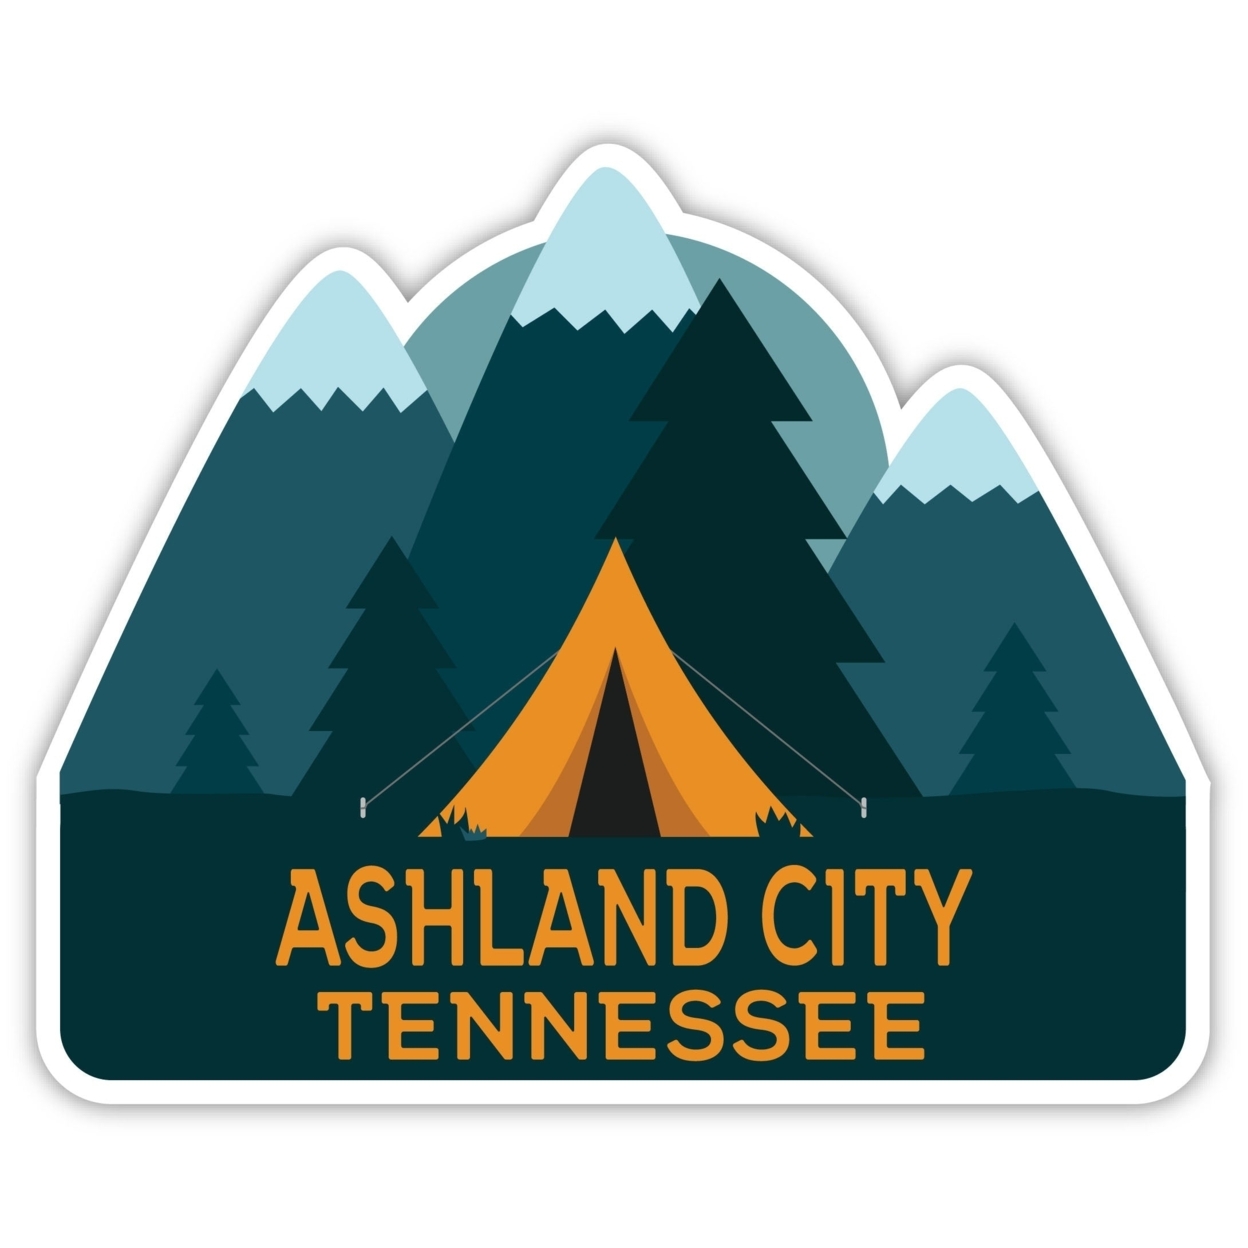 Ashland City Tennessee Souvenir Decorative Stickers (Choose Theme And Size) - 4-Pack, 6-Inch, Tent